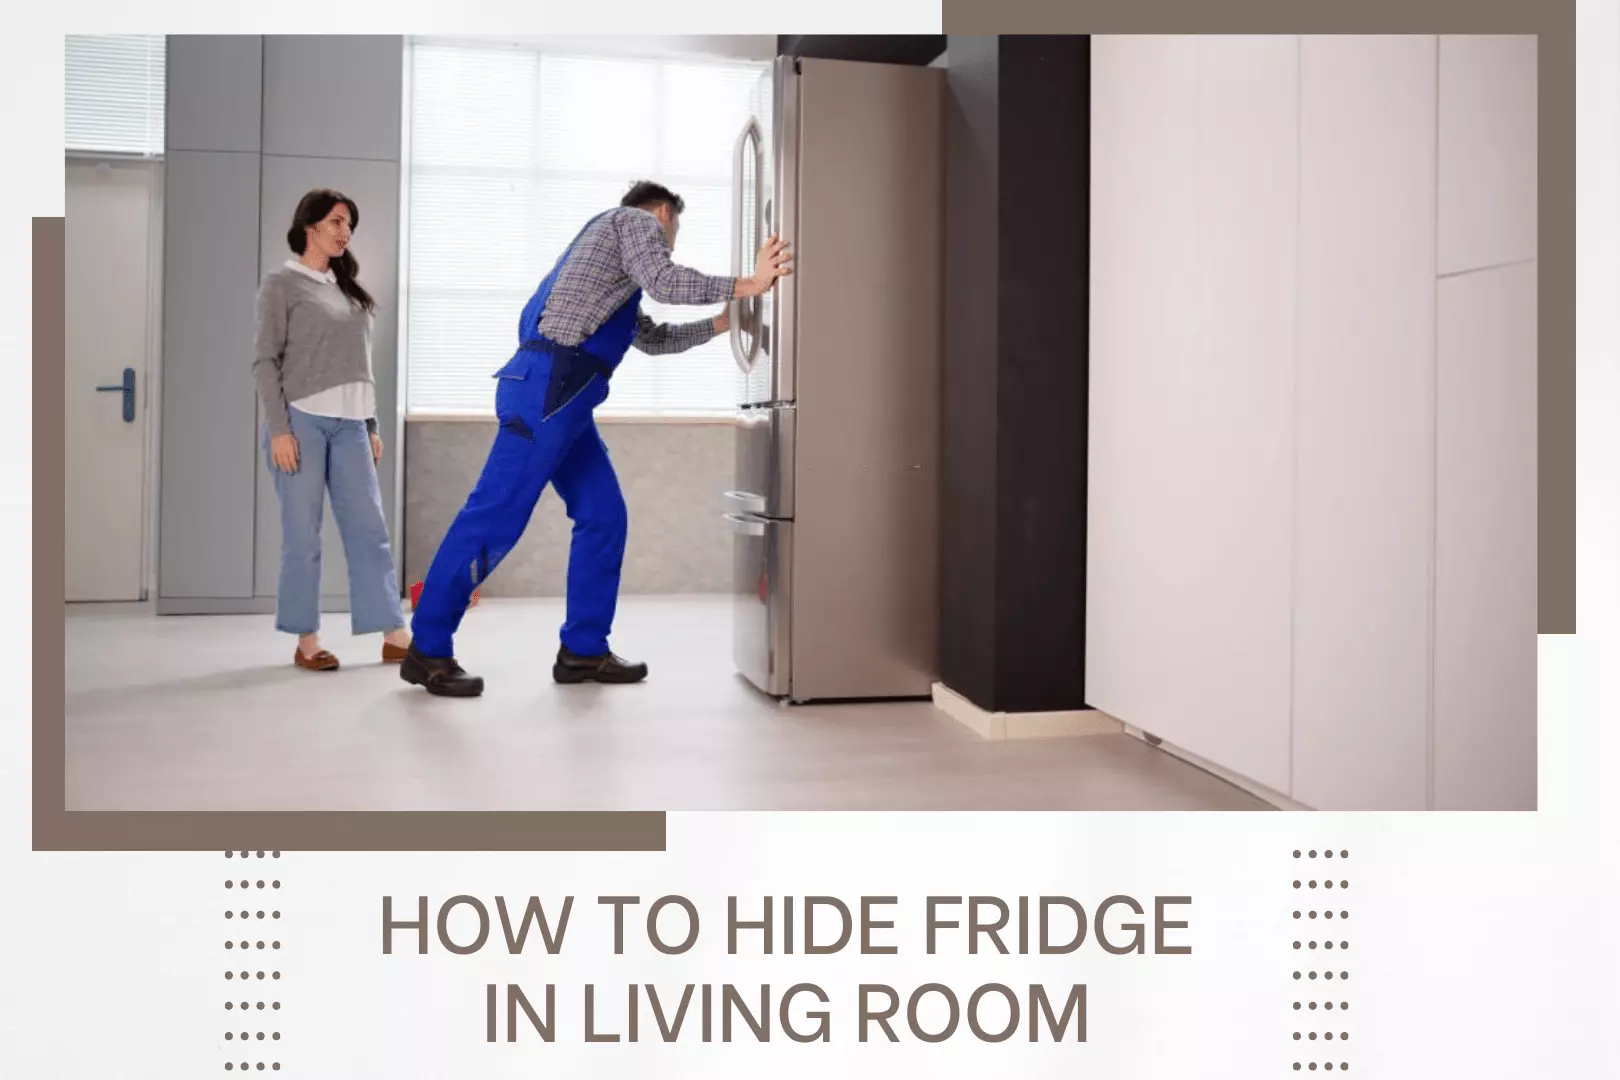 Sneaky Solutions: How to Hide Fridge in Living Room